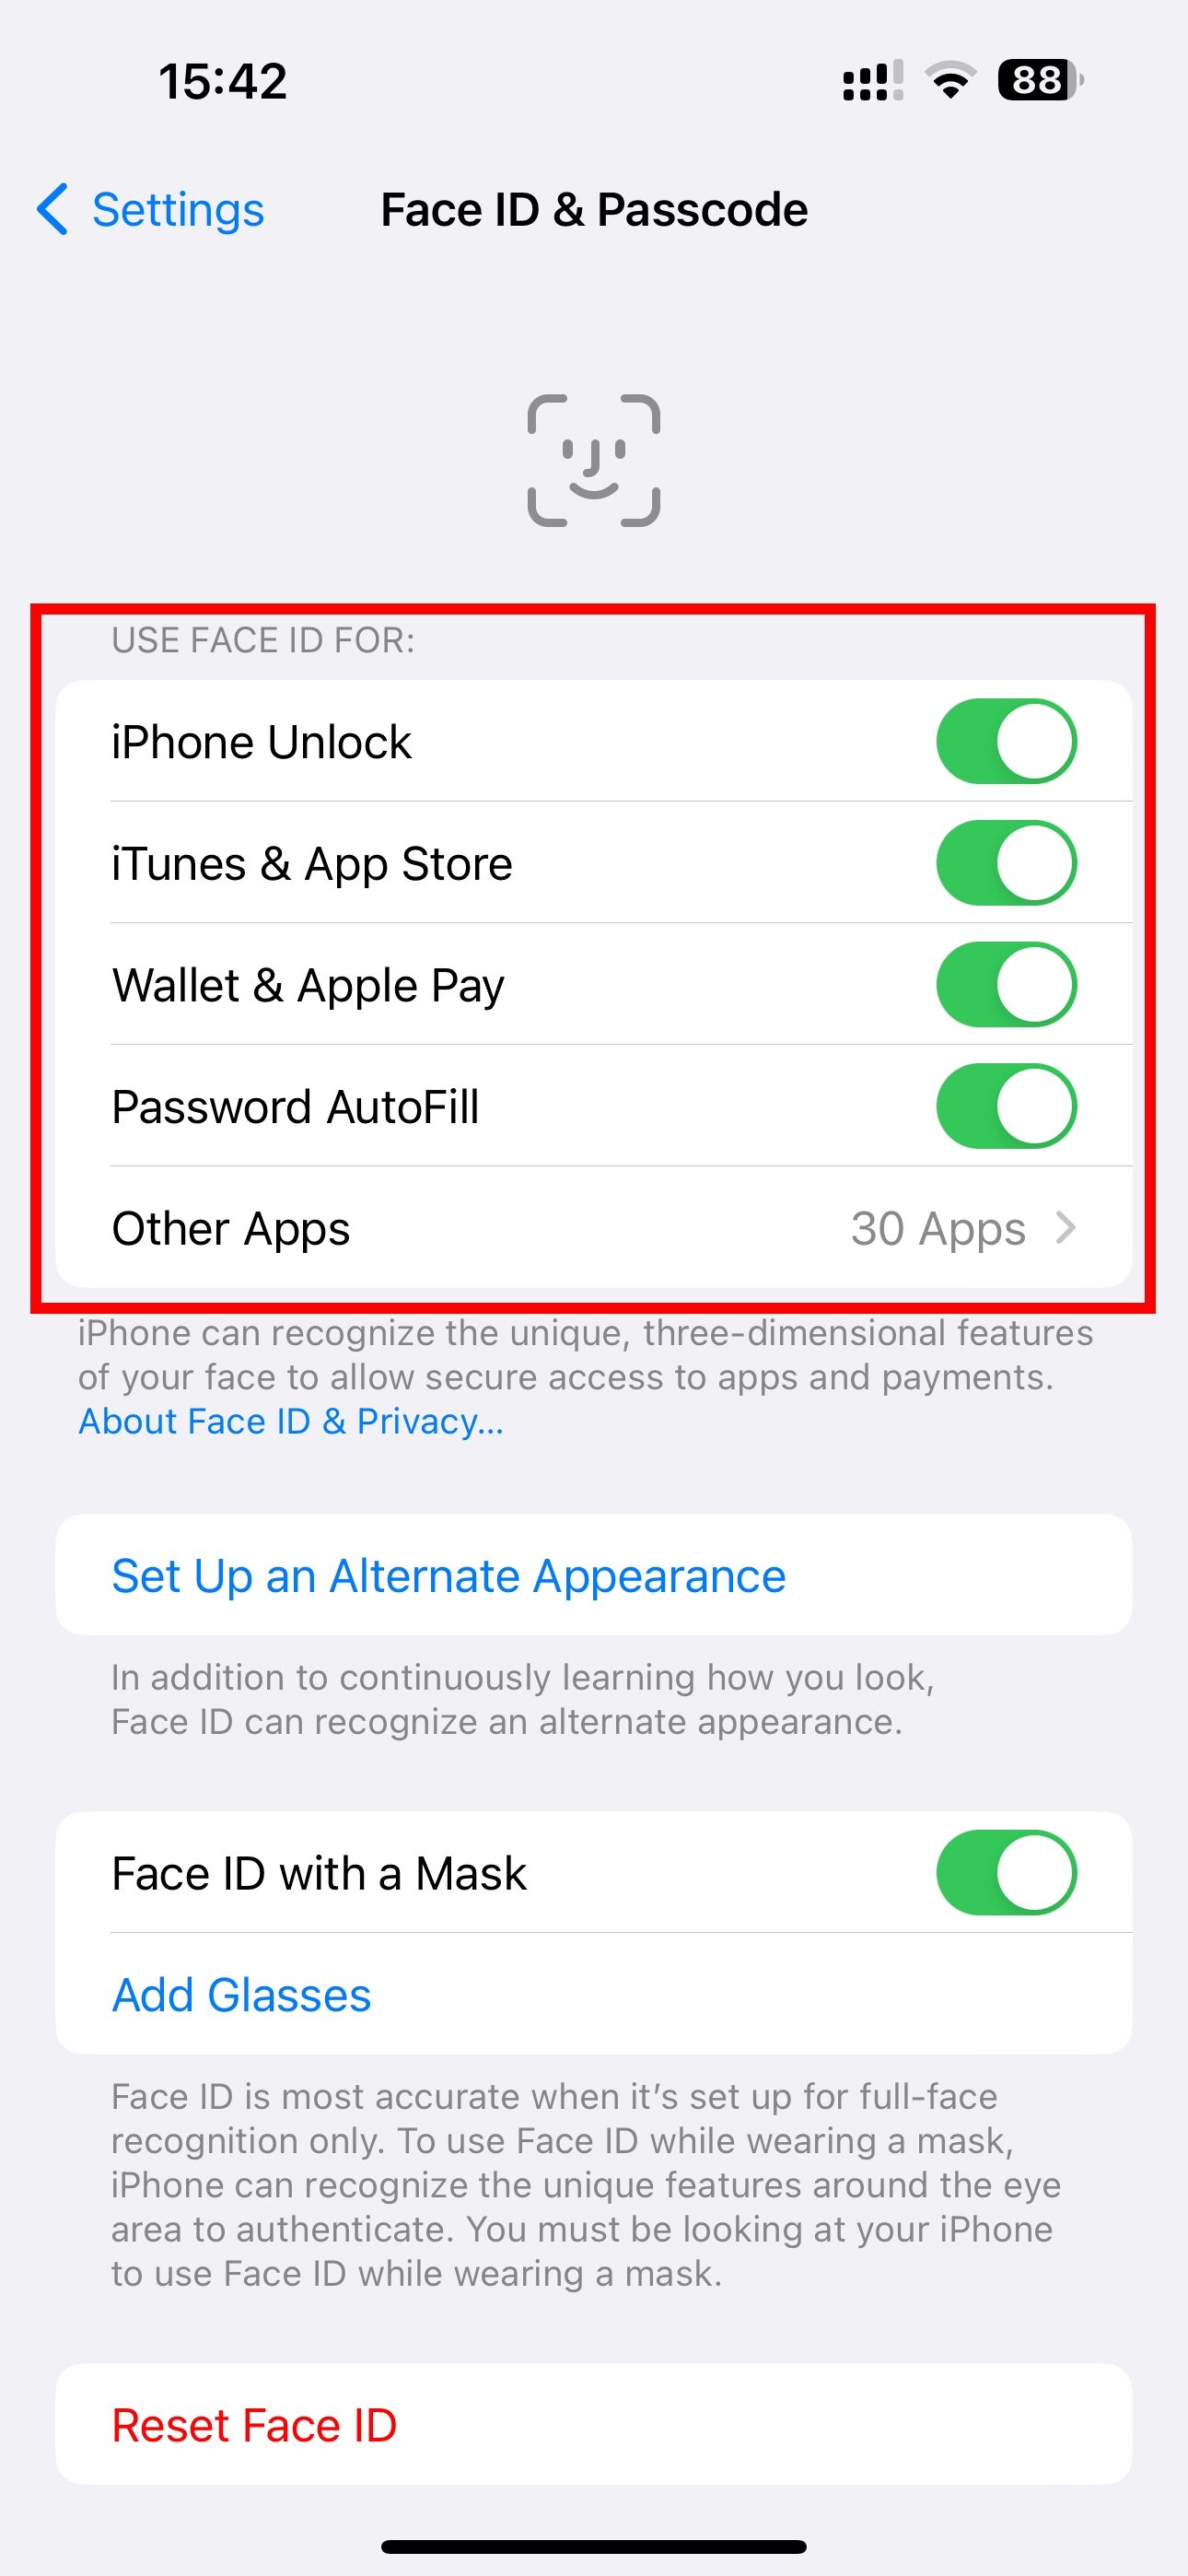 The Face ID and Passcode settings on iPhone with the Use Face ID For section highlighted